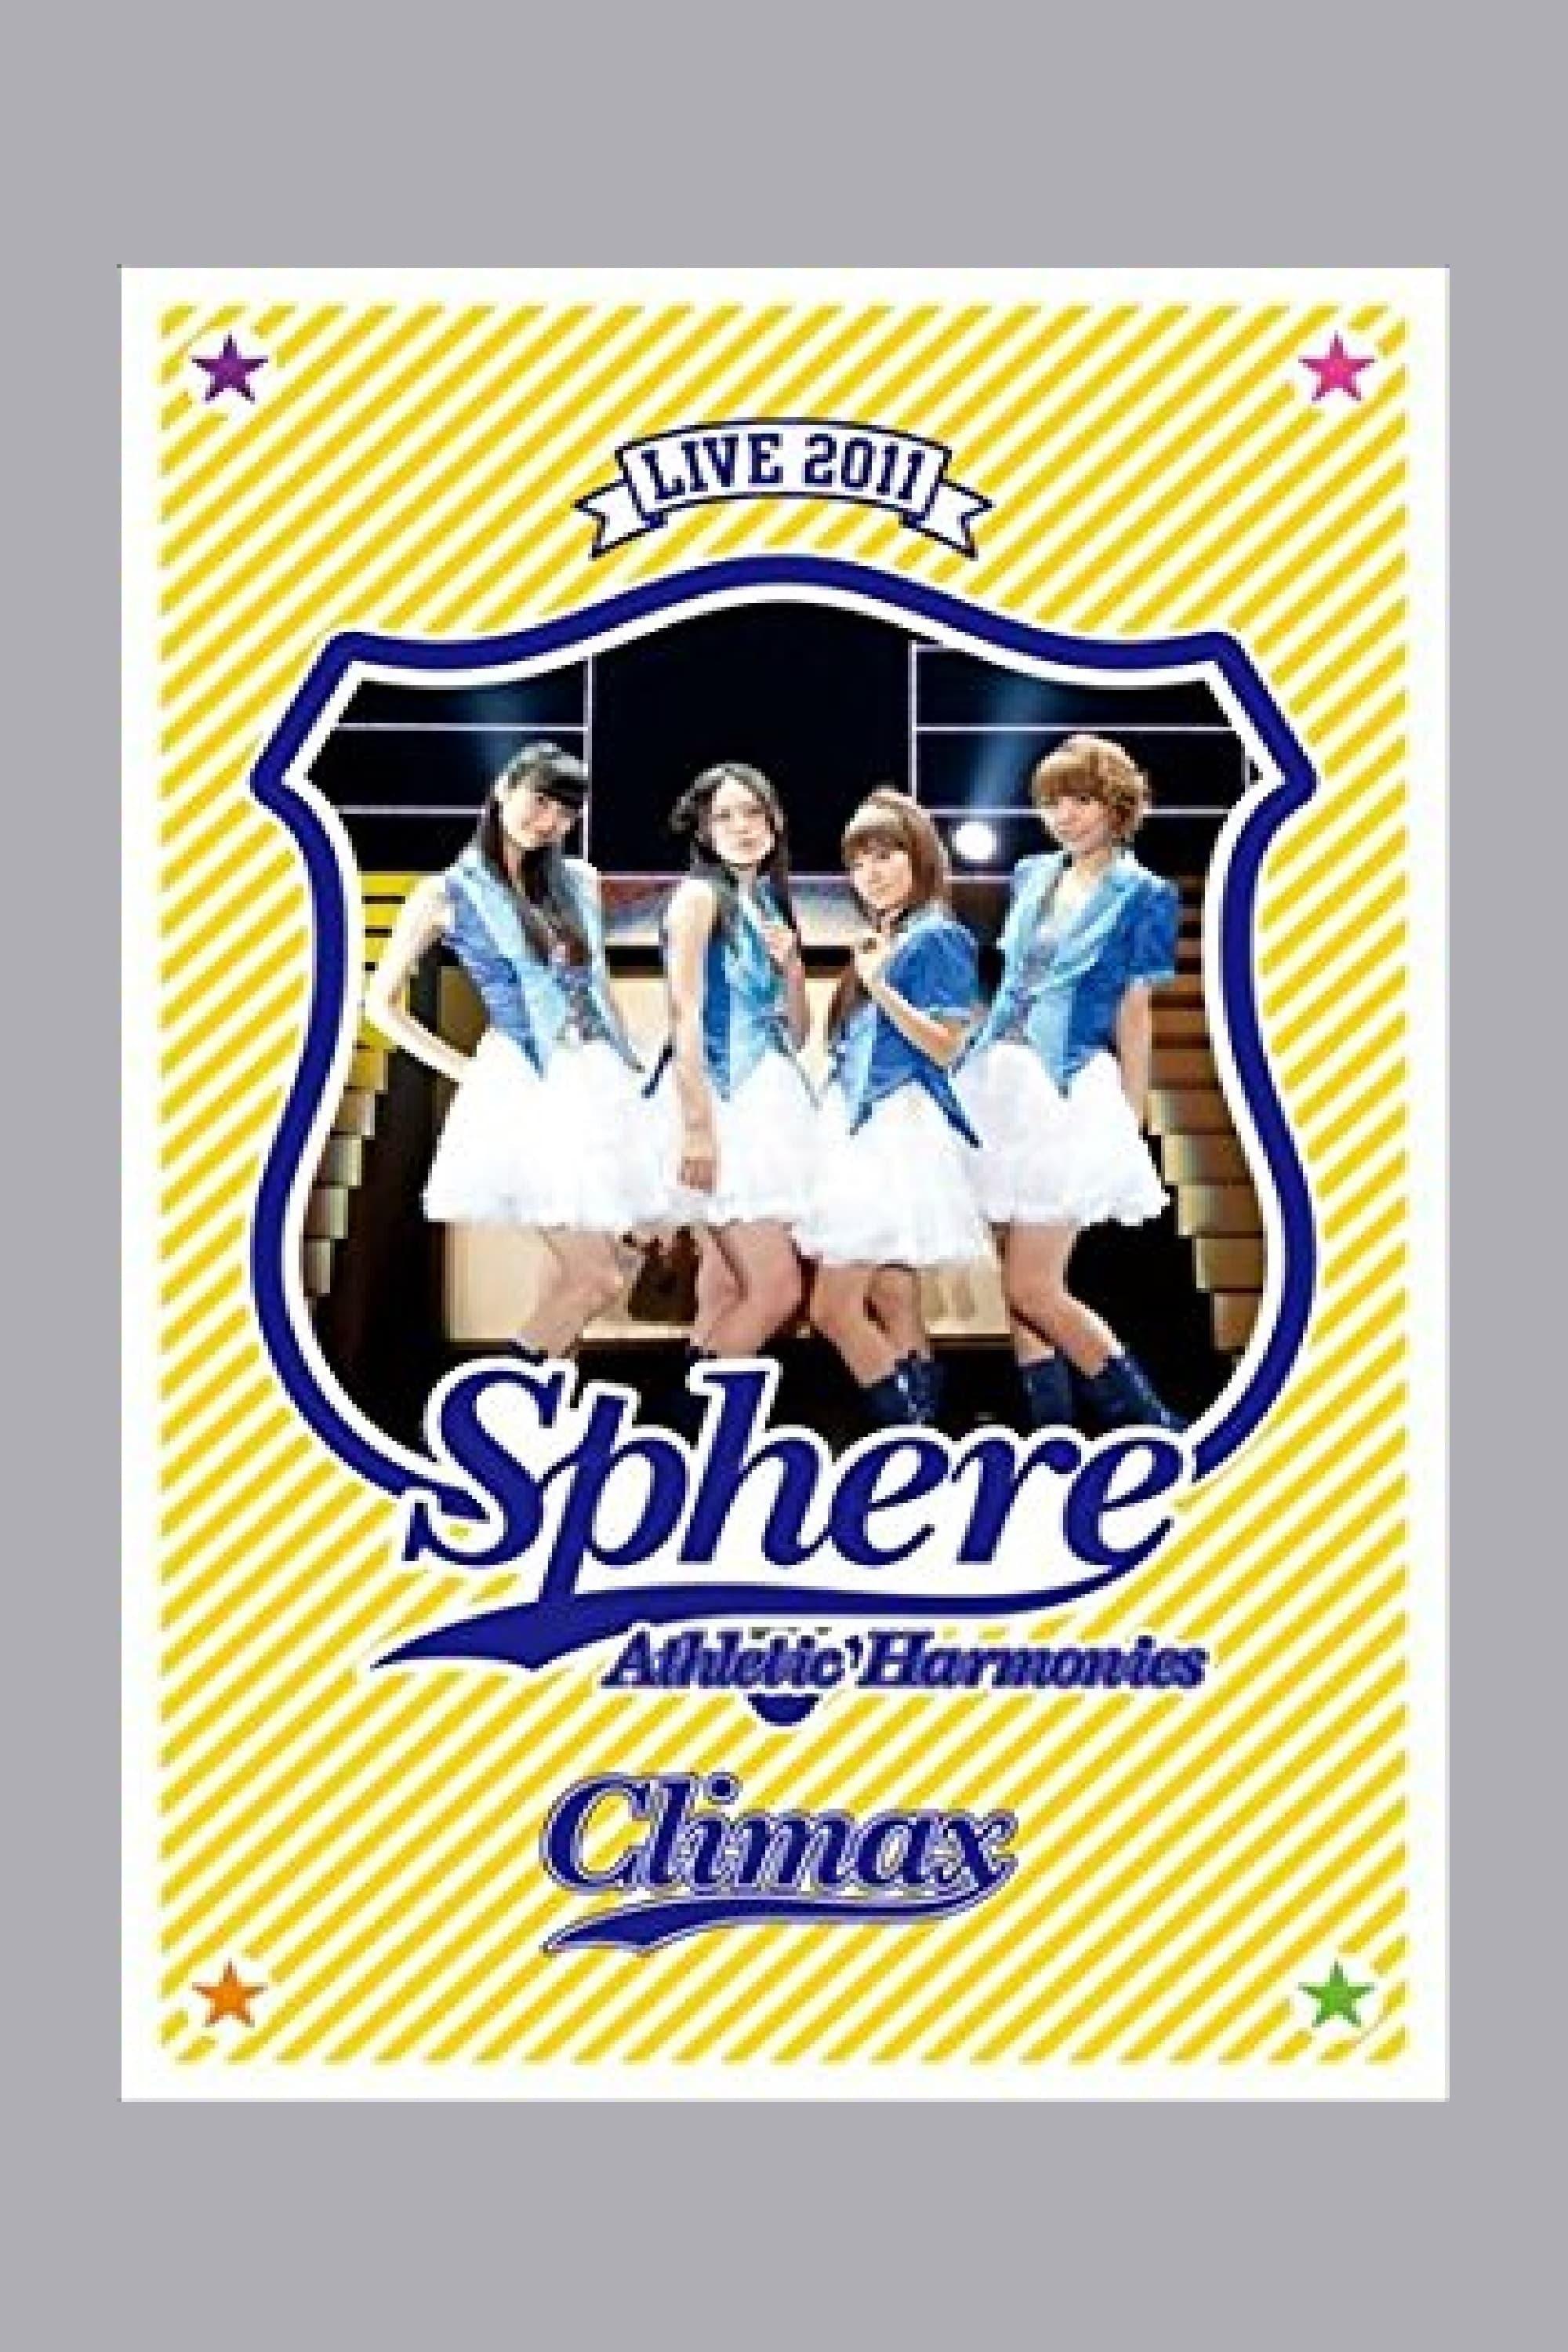 Sphere Live 2011 Athletic Harmonies - Climax Stage poster